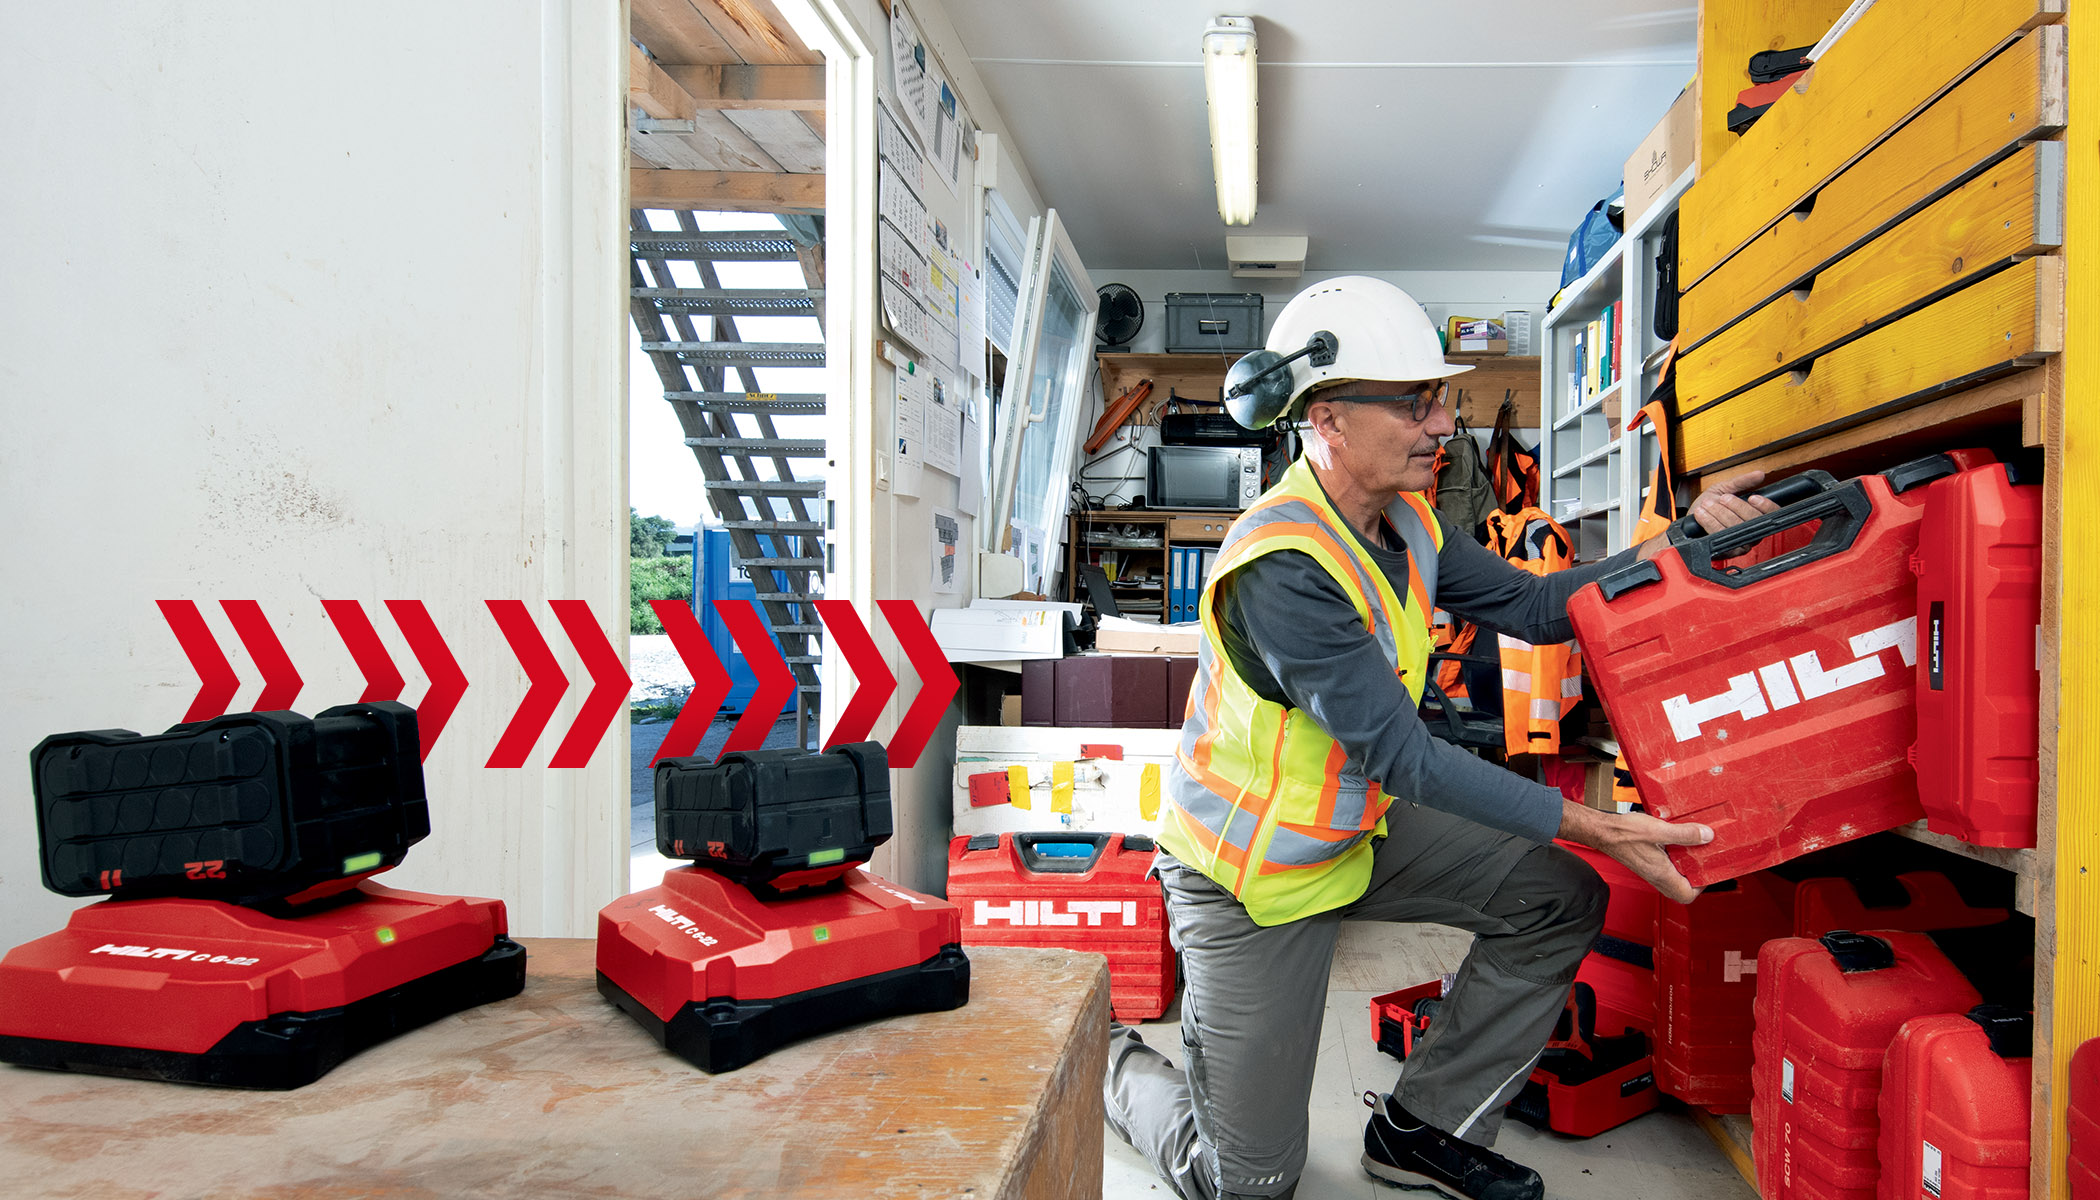 Tool Crib Manager putting away a Hilti Tool Box on a shelf in a construction container